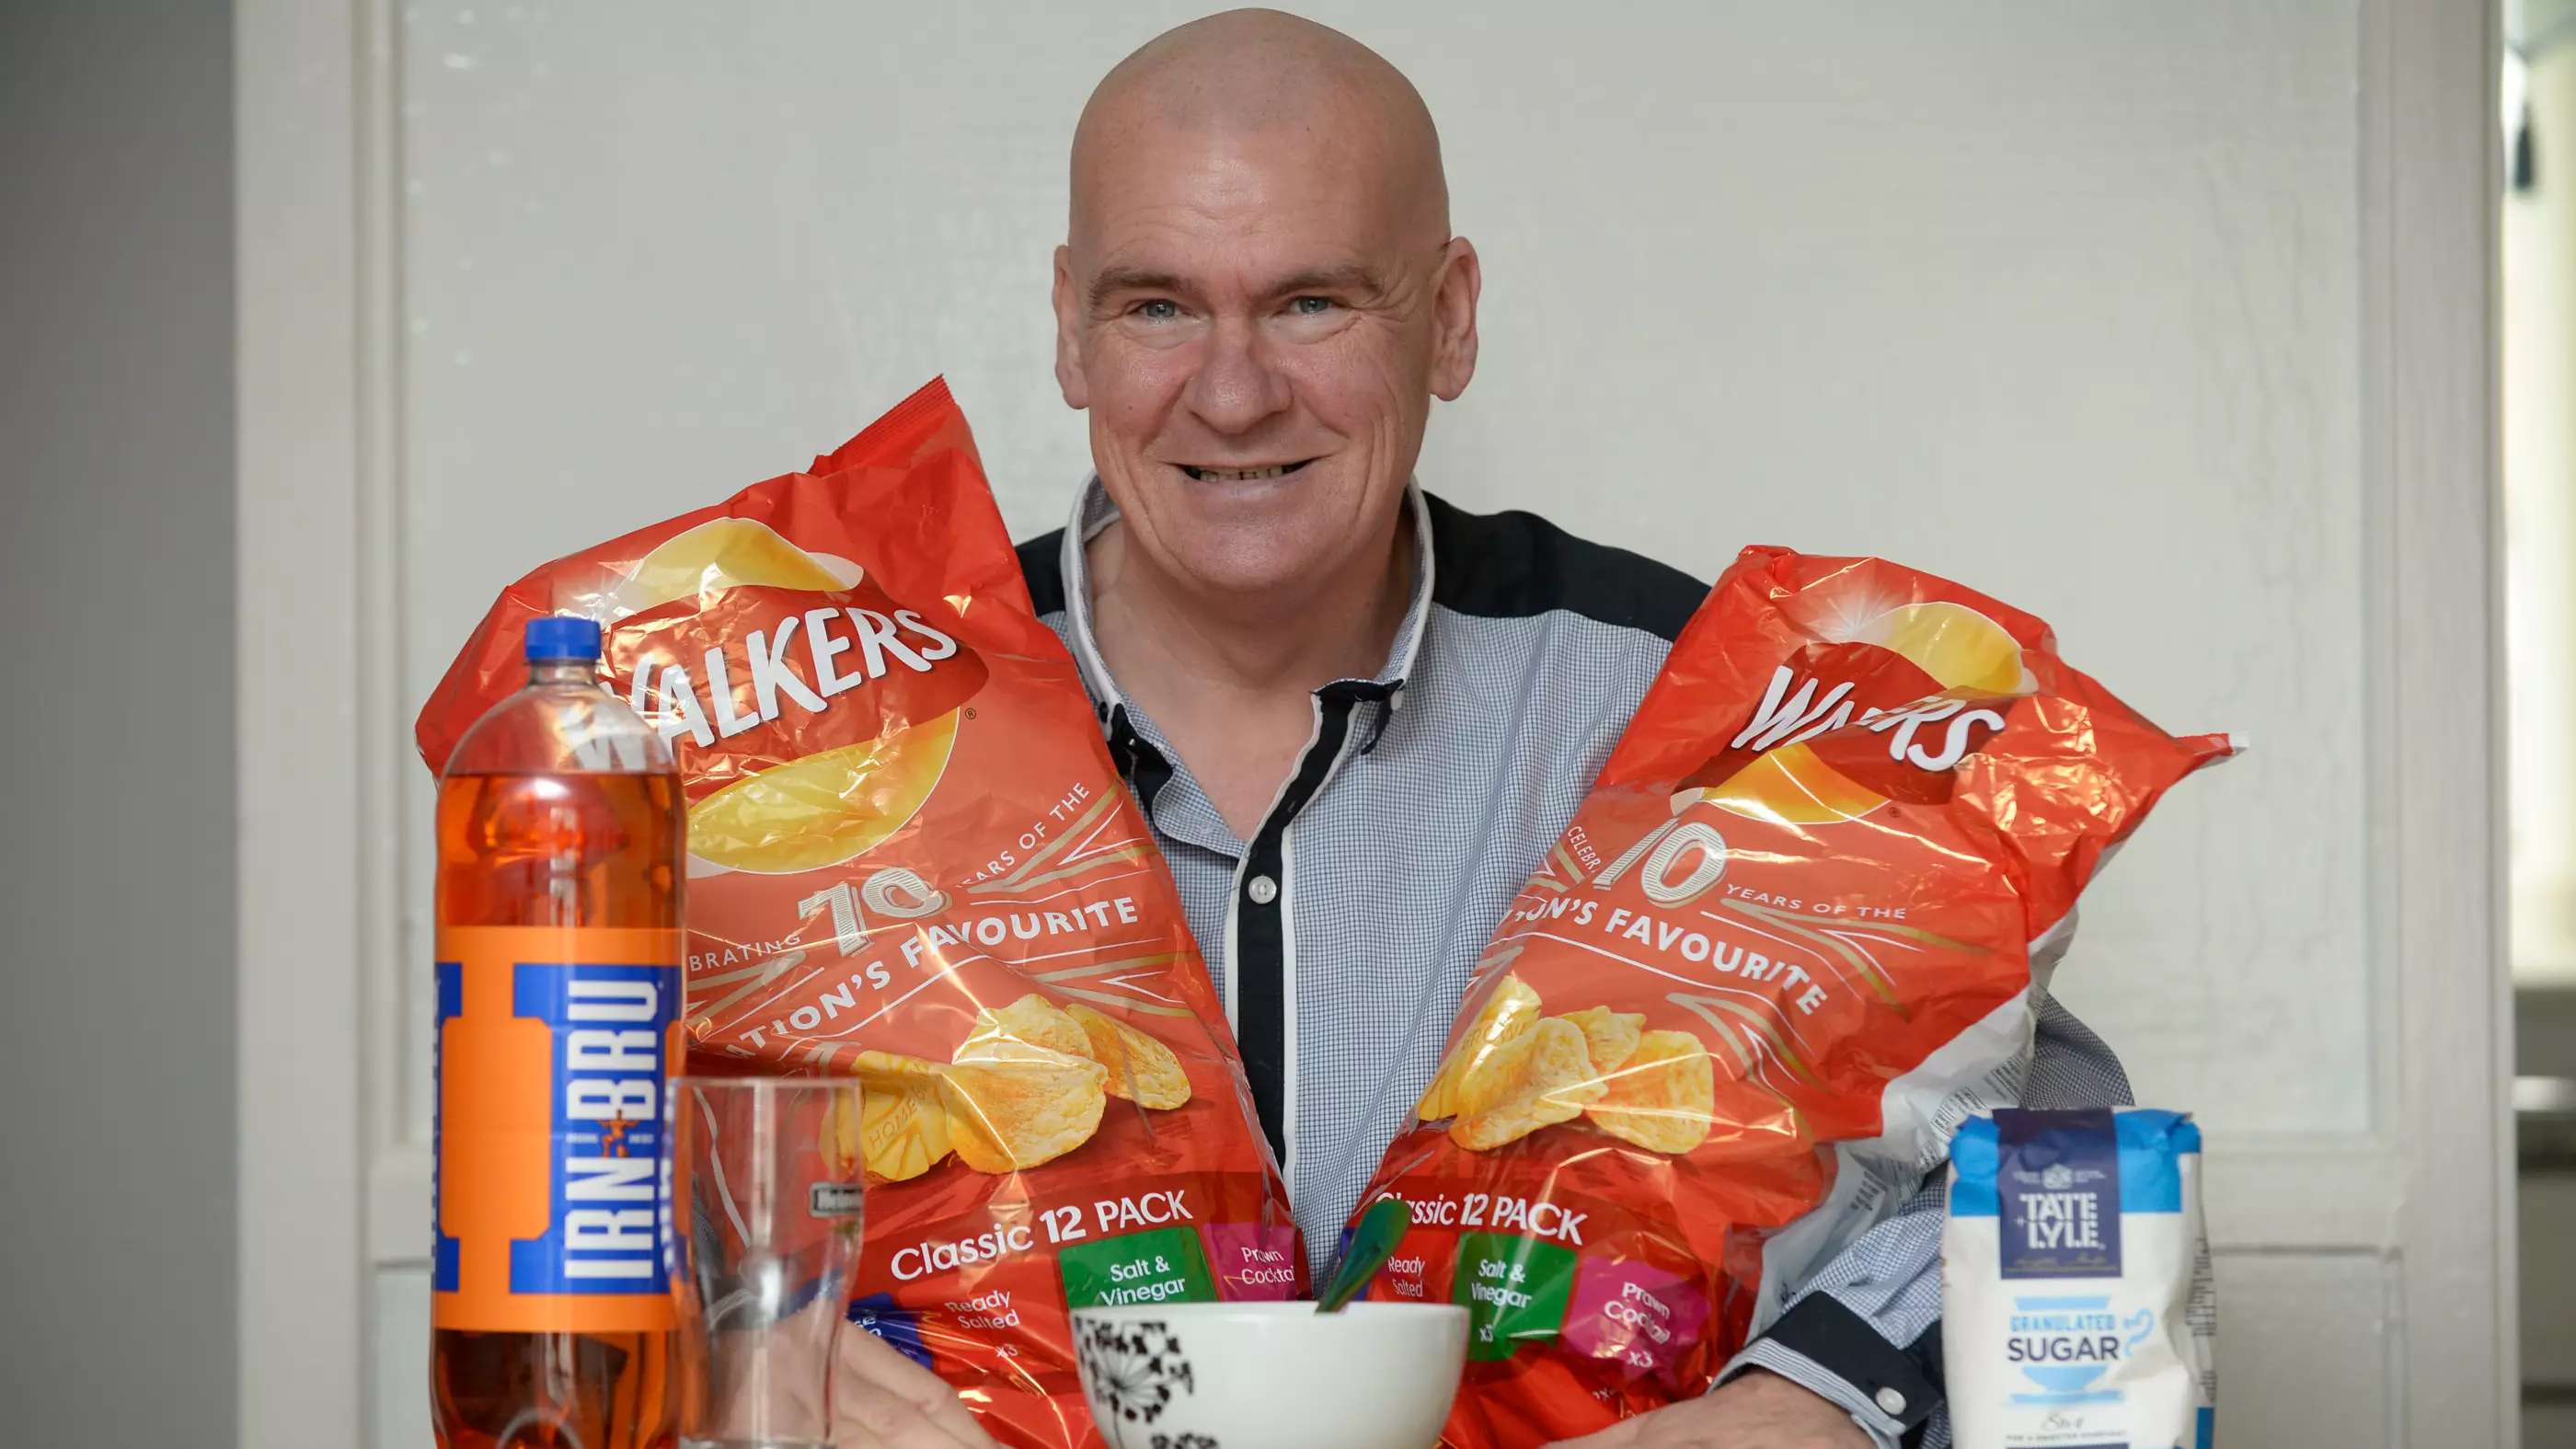 Man Who Ate 24 Packs Of Crisps A Day Undergoes Amazing Weight Loss Transformation 